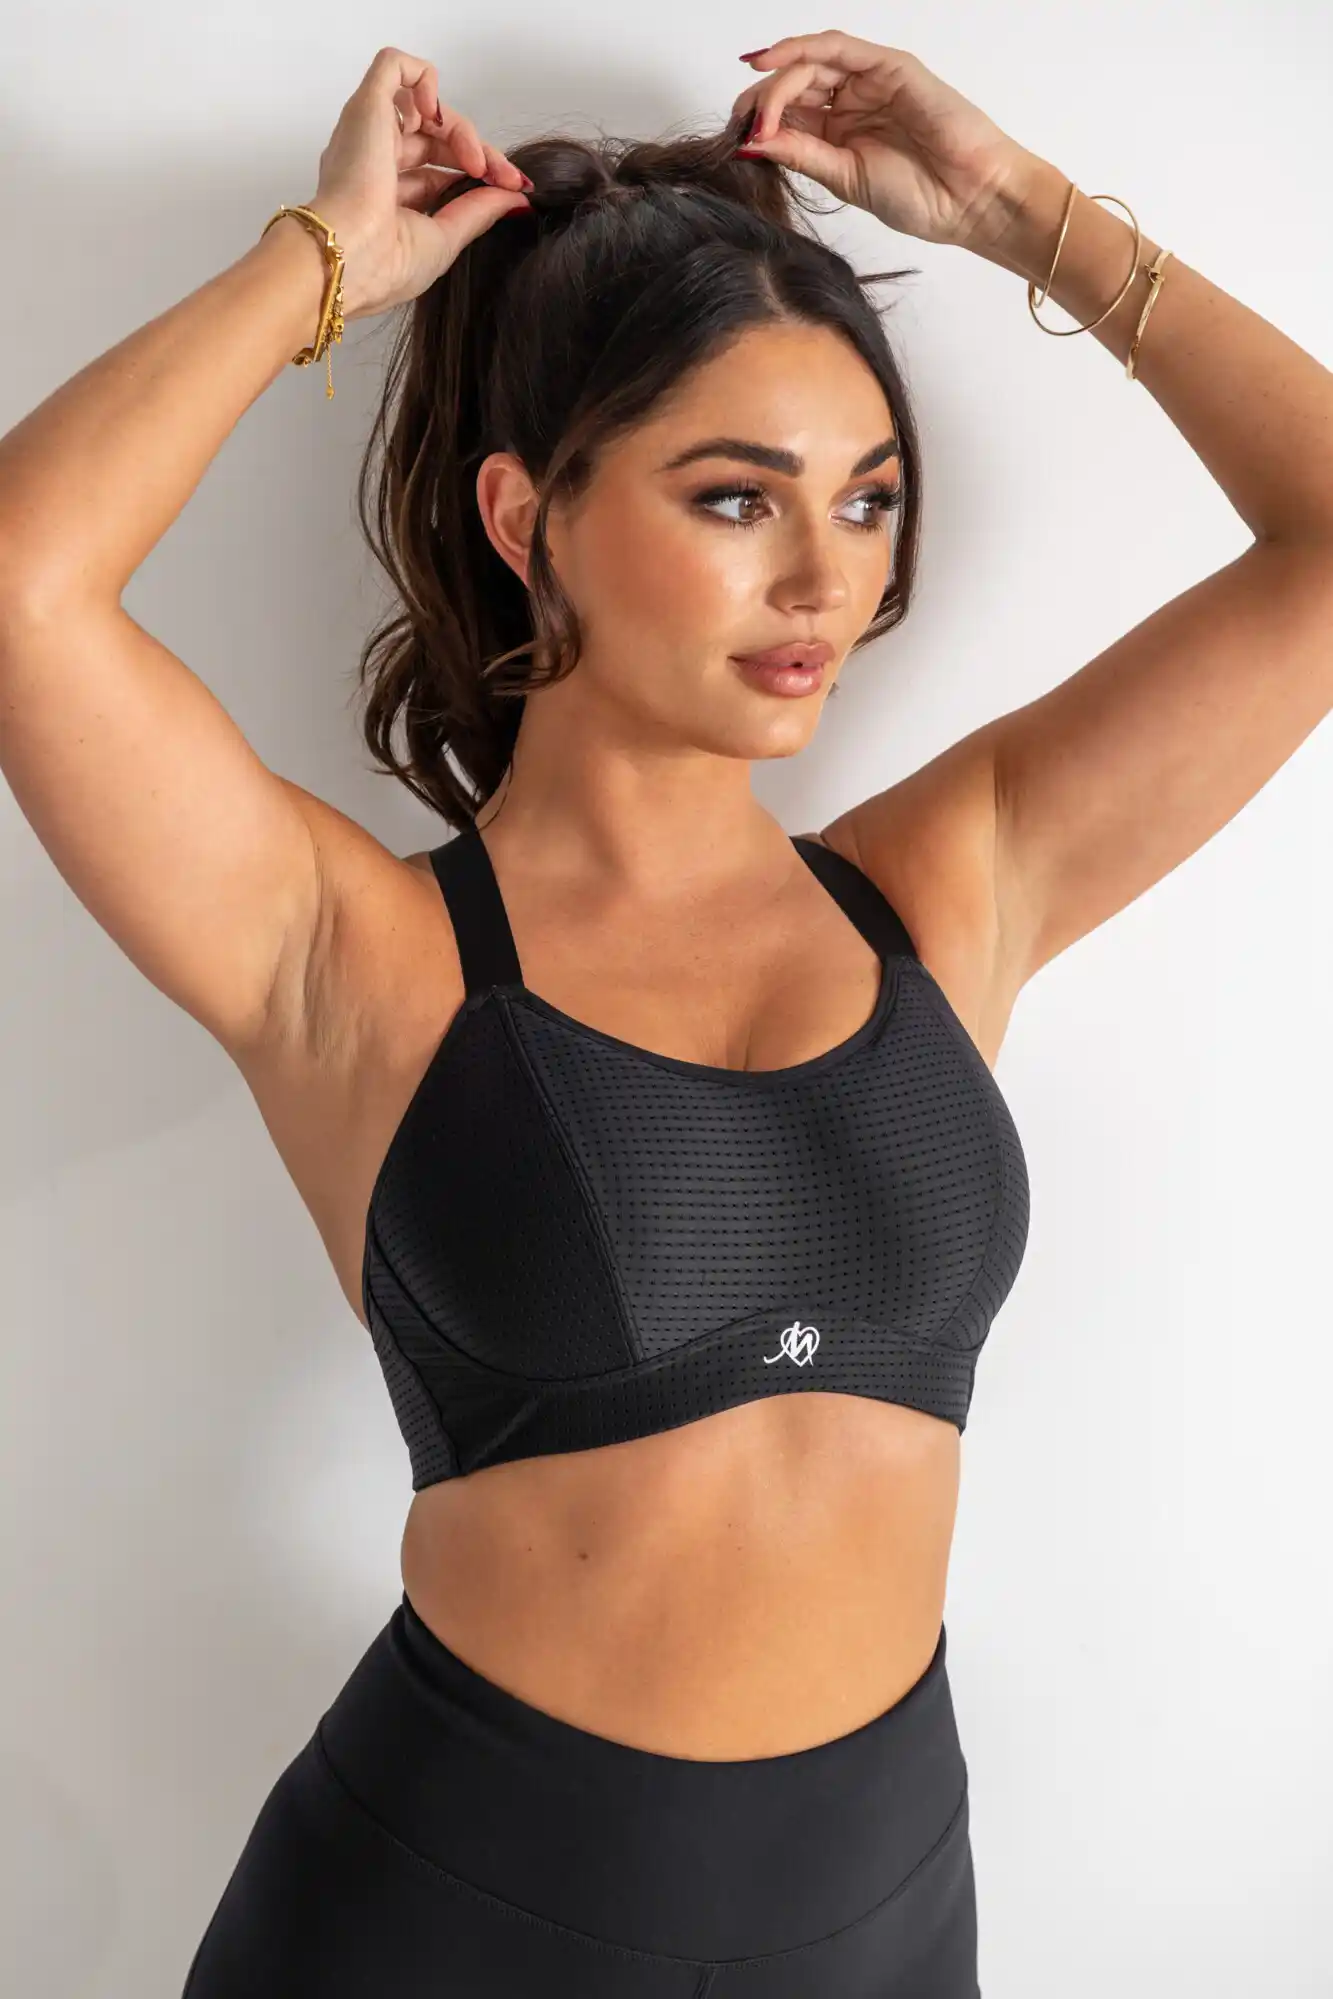 Padded Crop top. Browse Brazilian Padded sports bras